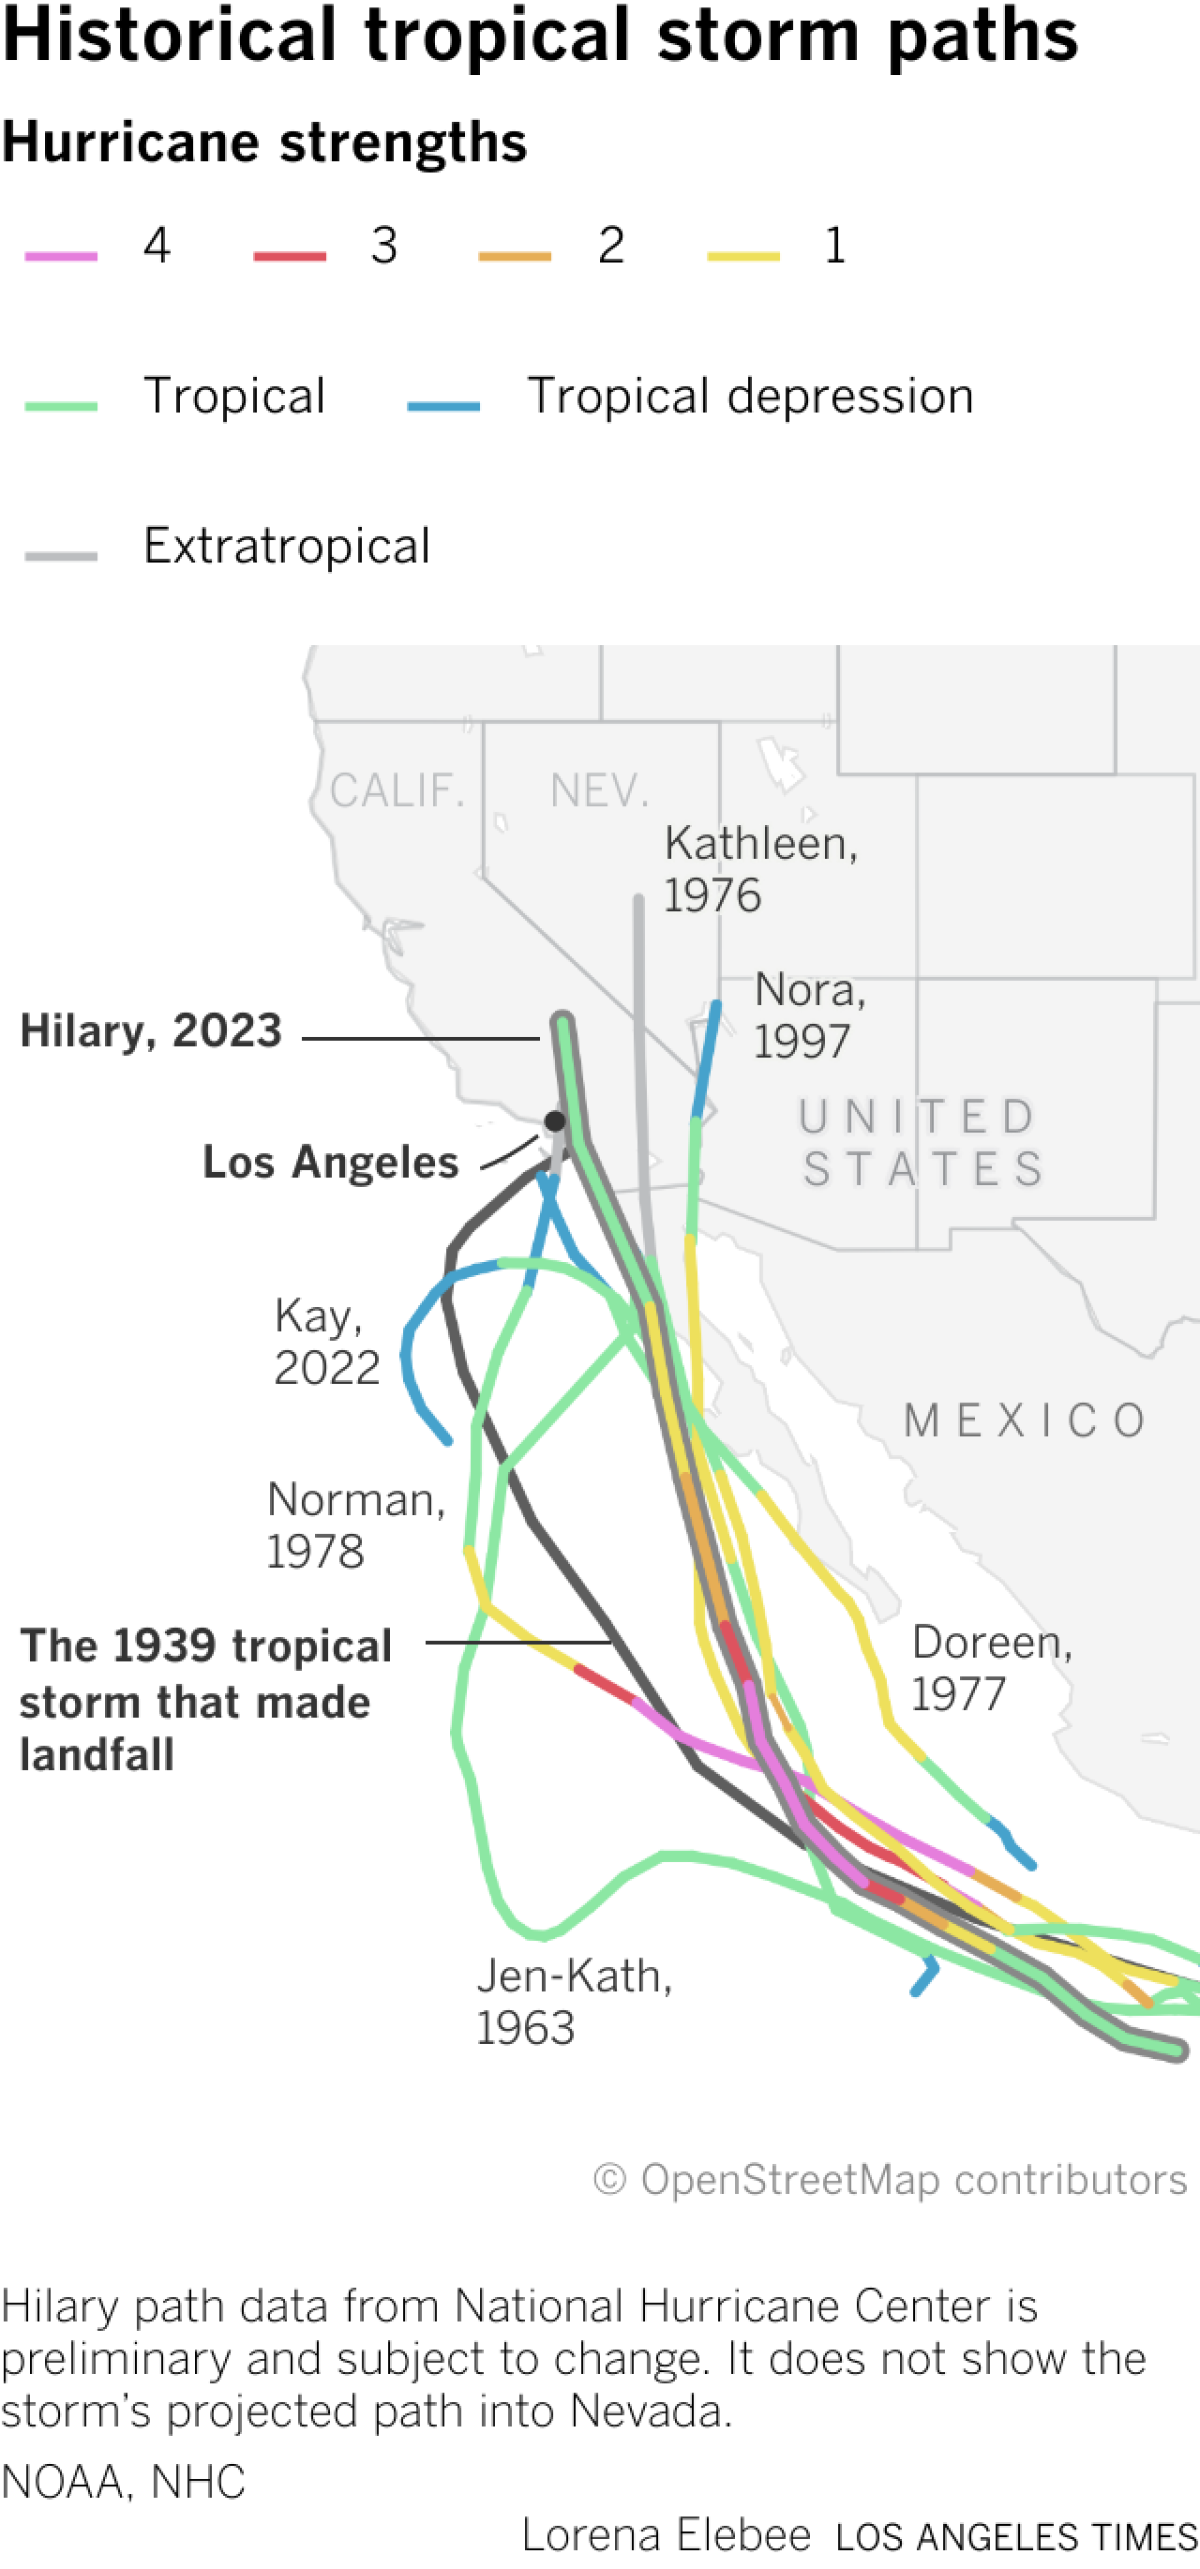 Map shows six hurricane storm paths near Southern California, including a storm path from 1939.